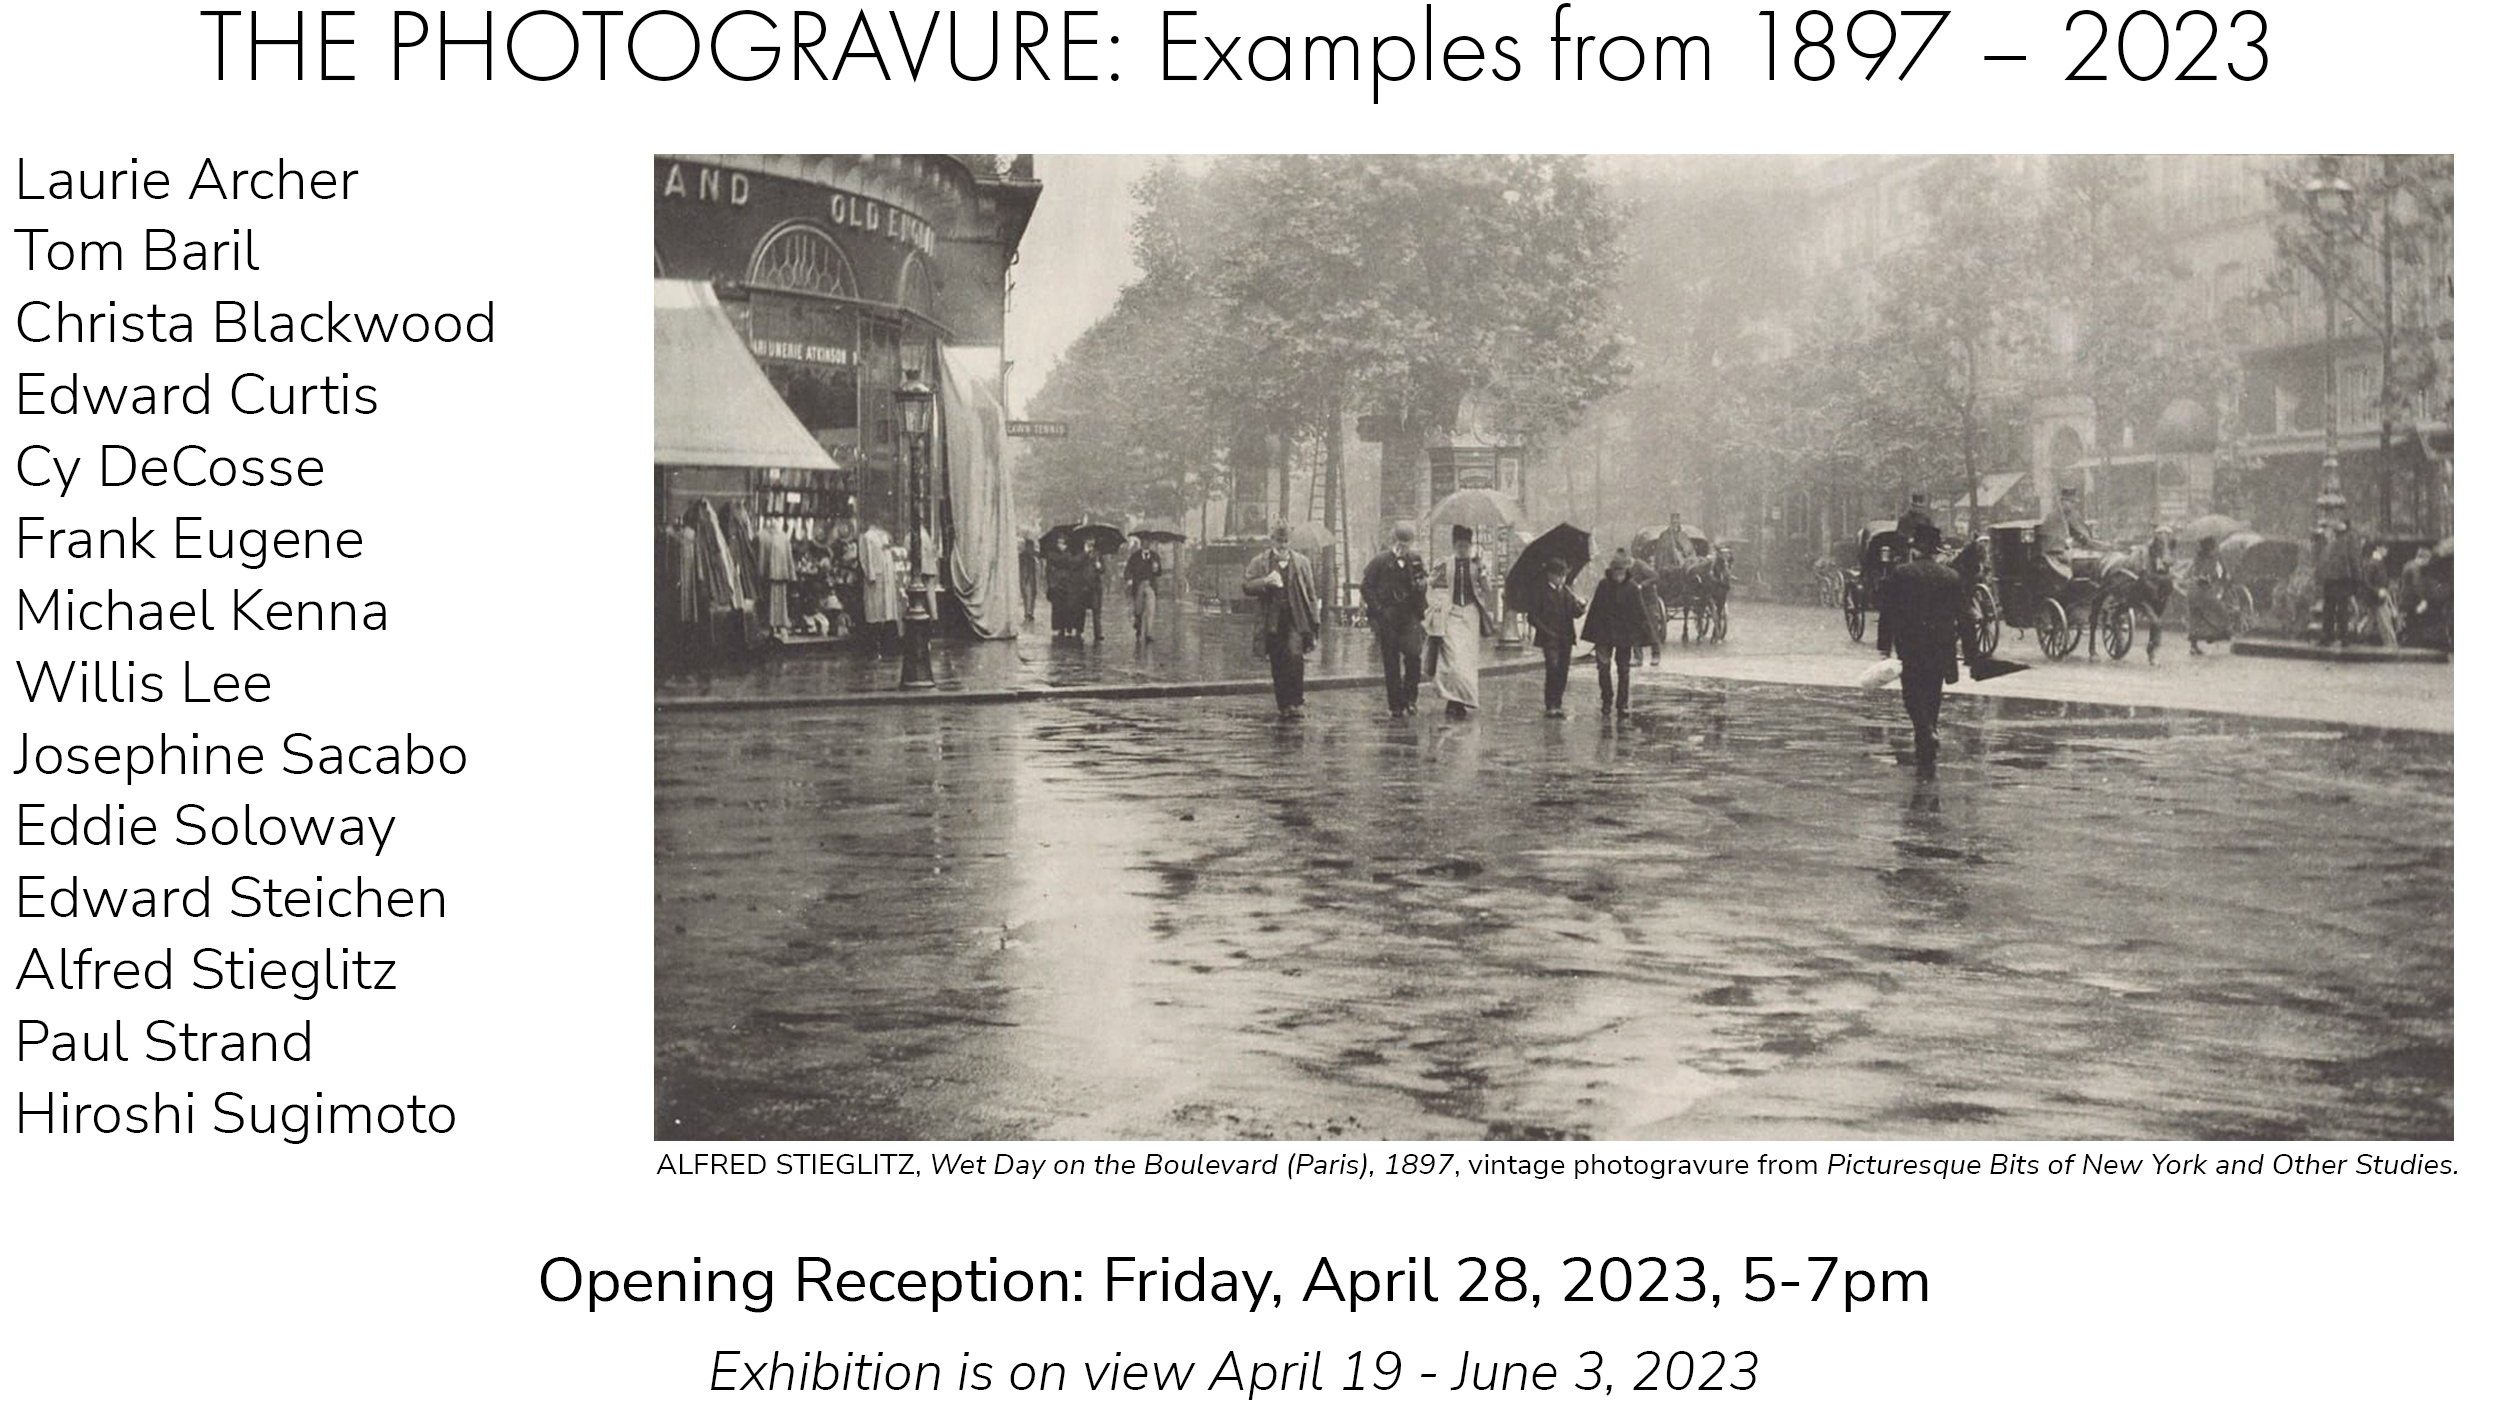 The photogravure: Examples from 1897 - 2023. Opening on Friday, April 28, 2023- 5-7pm on view through June 3.